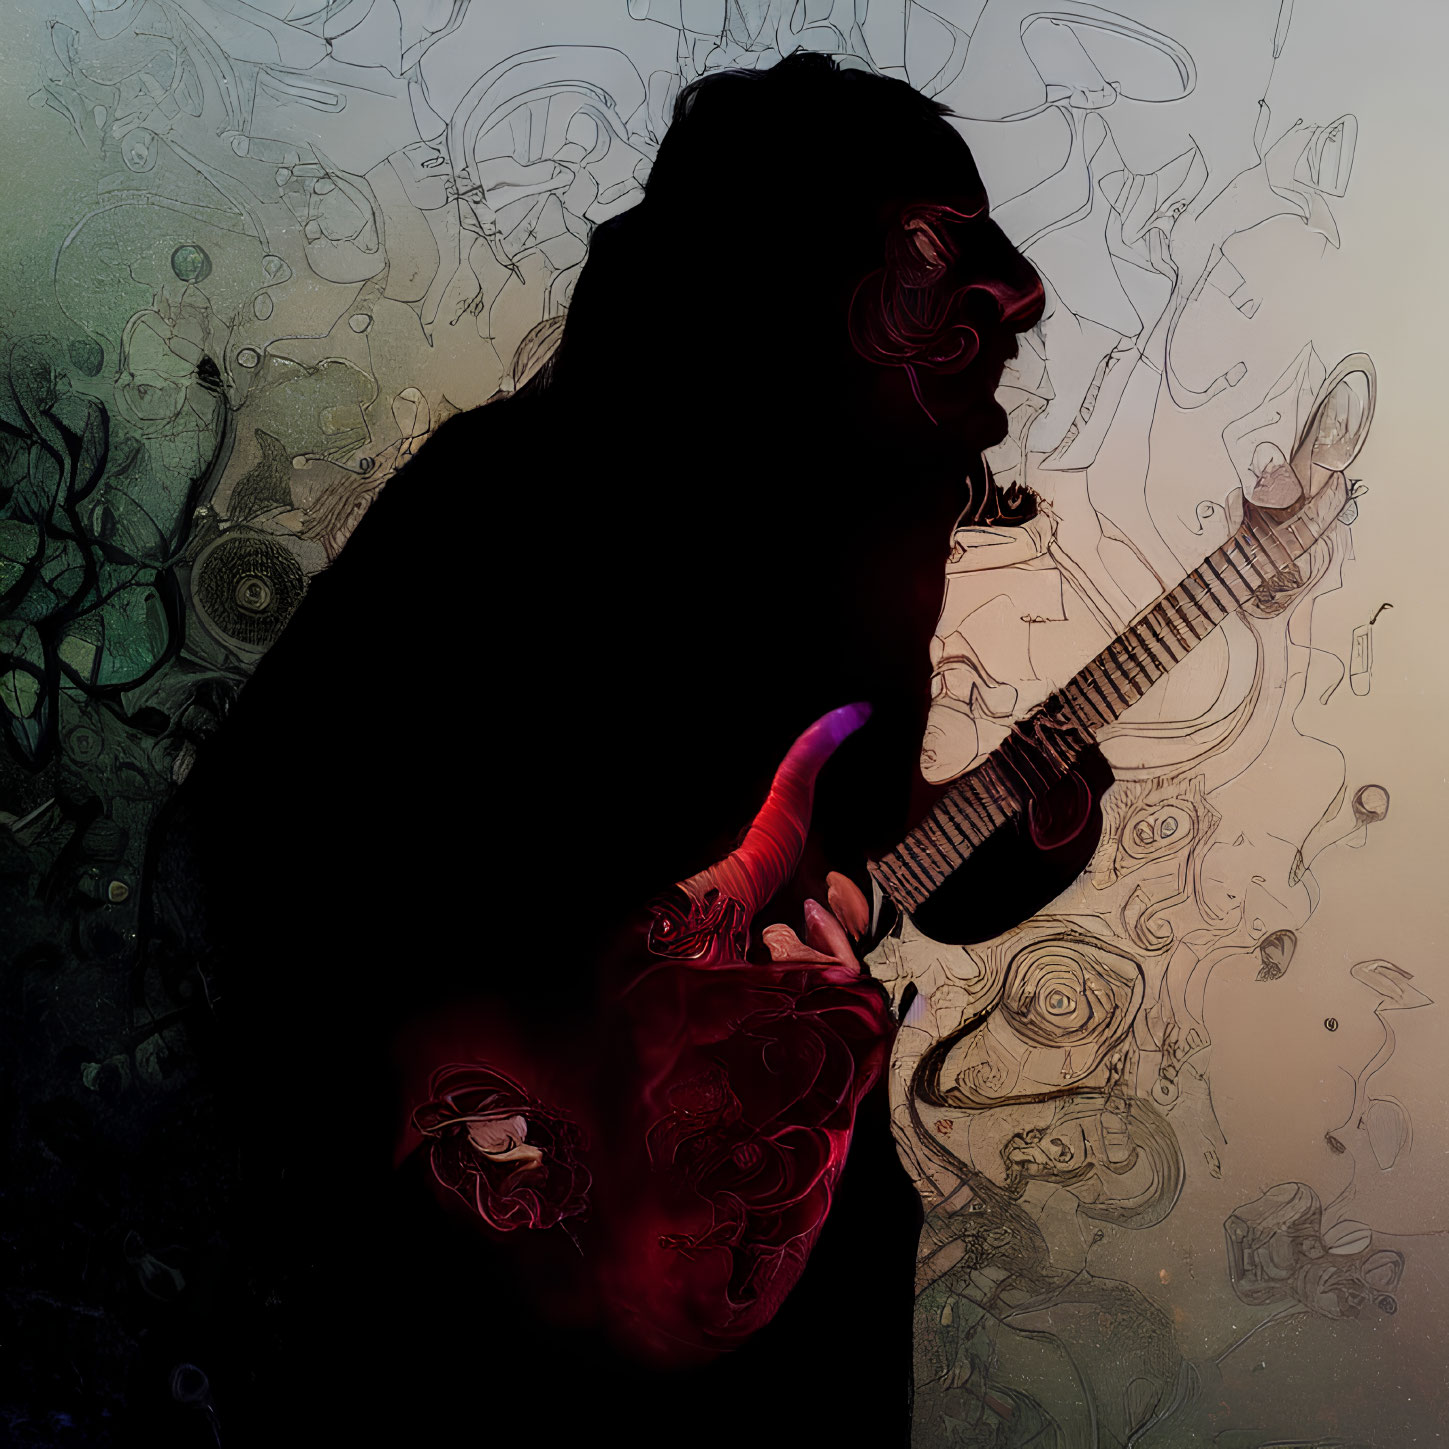 Silhouetted figure playing electric guitar on colorful abstract background.